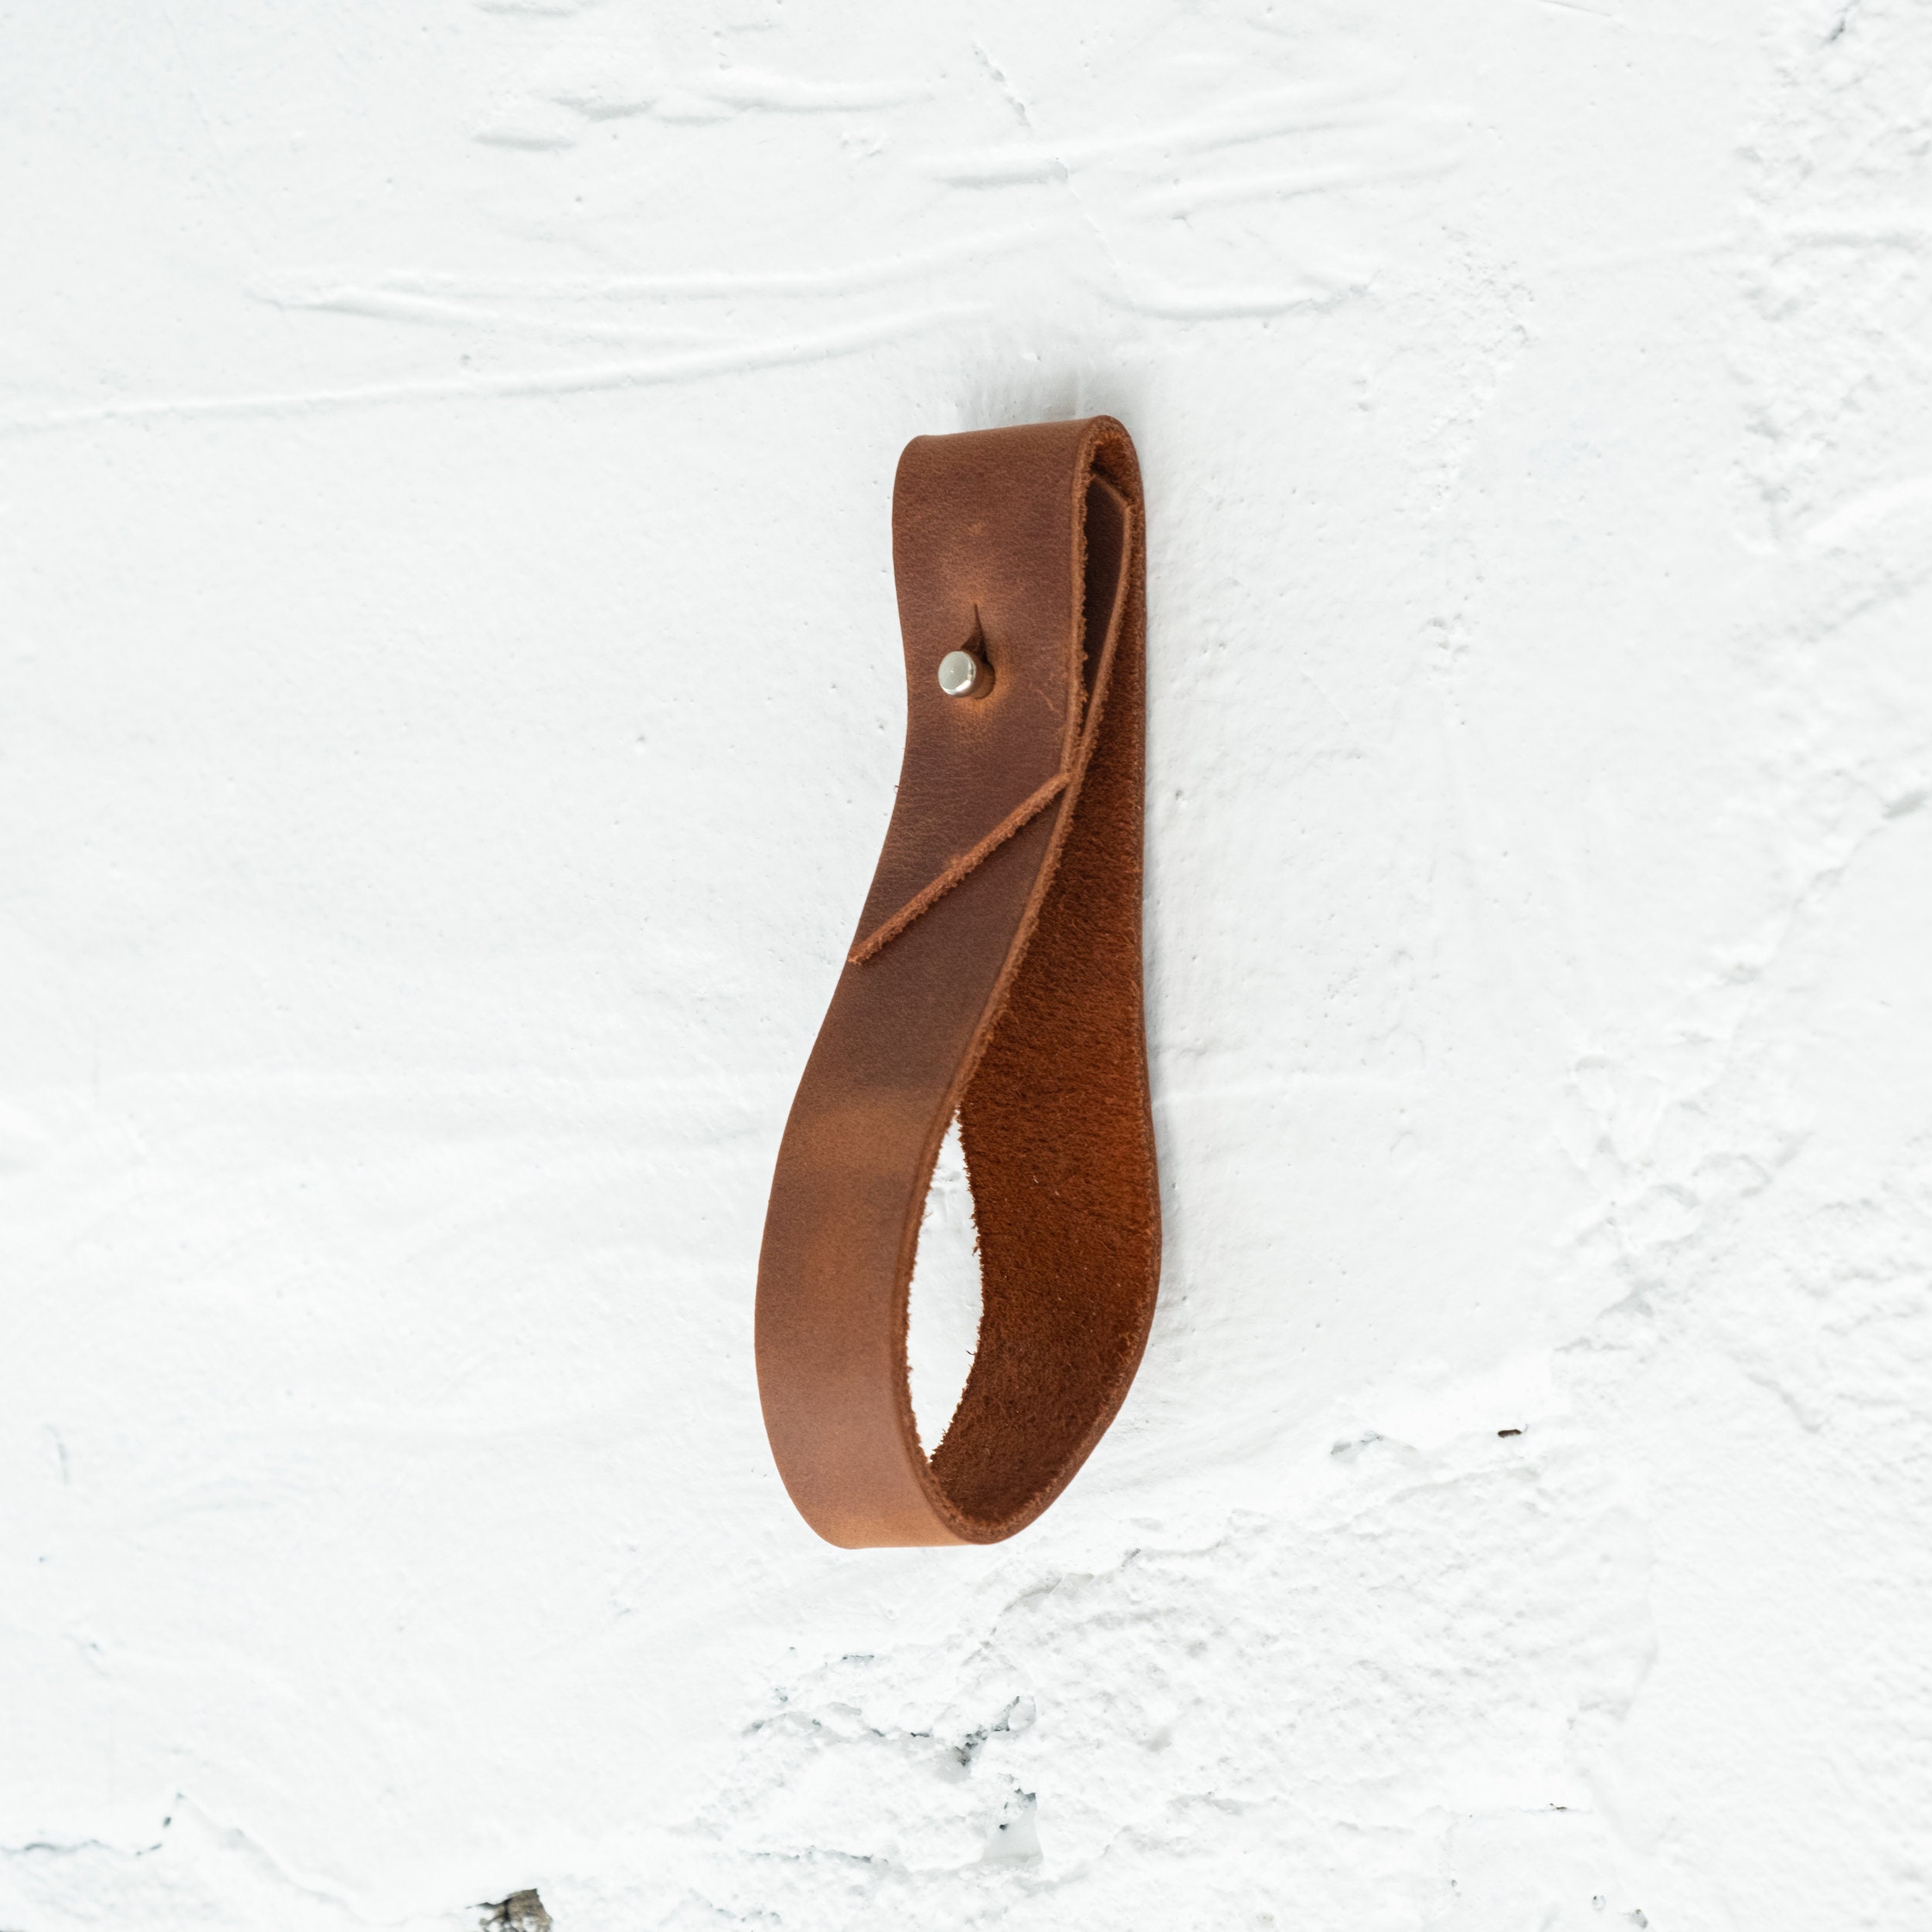 Custom Leather Wall Strap for Hanging Pillow Cushions, Headboards